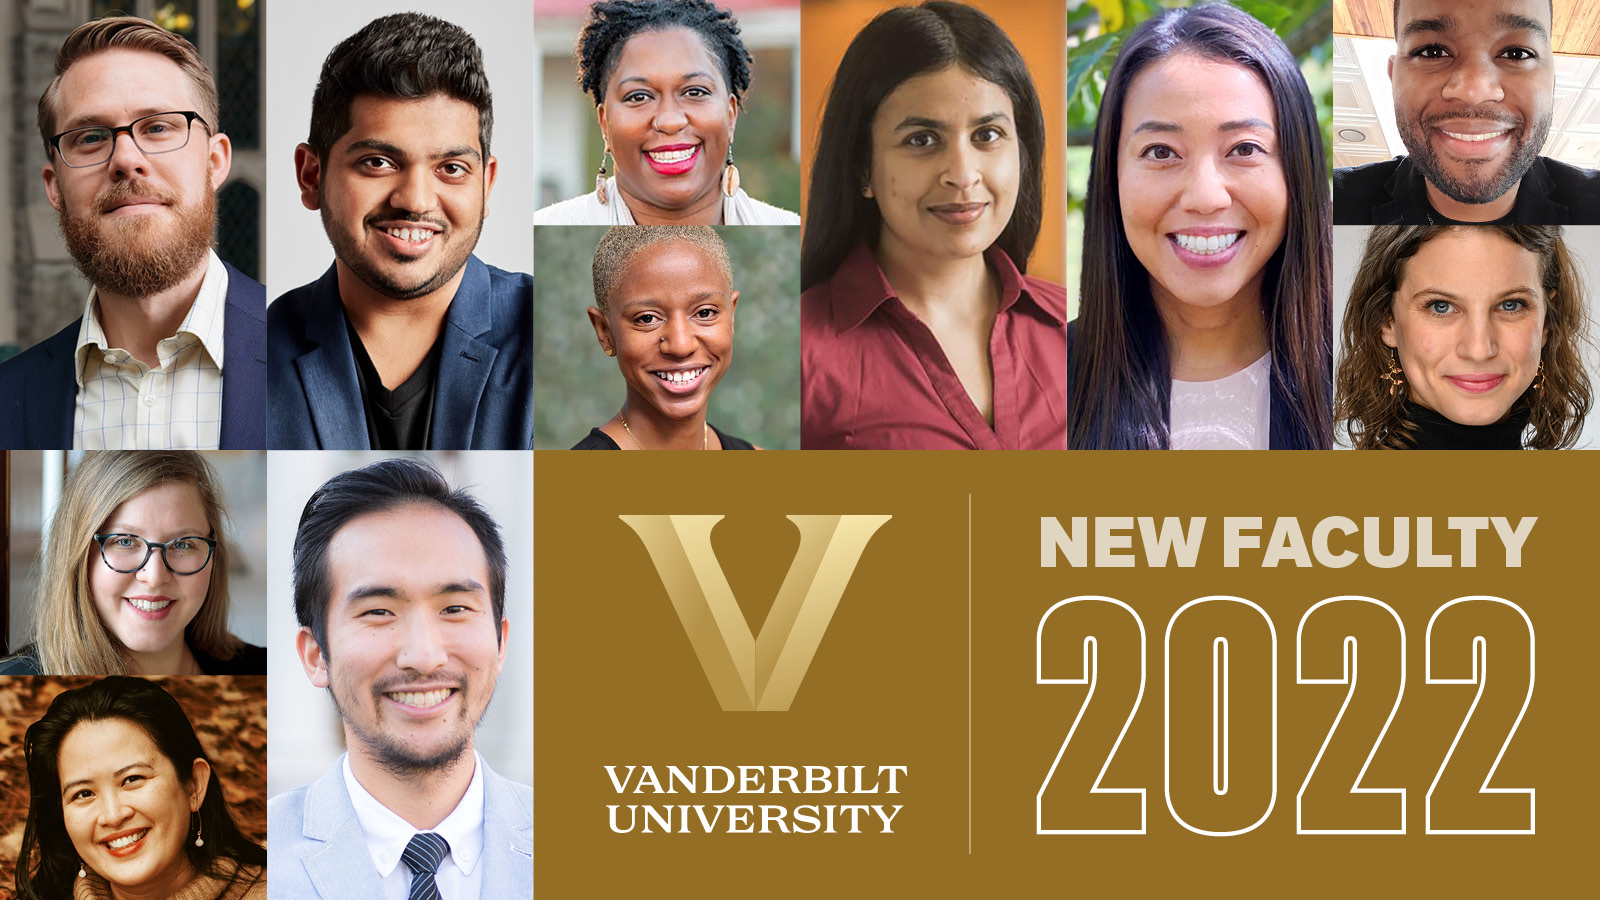 NEW FACULTY: Exploring challenging topics